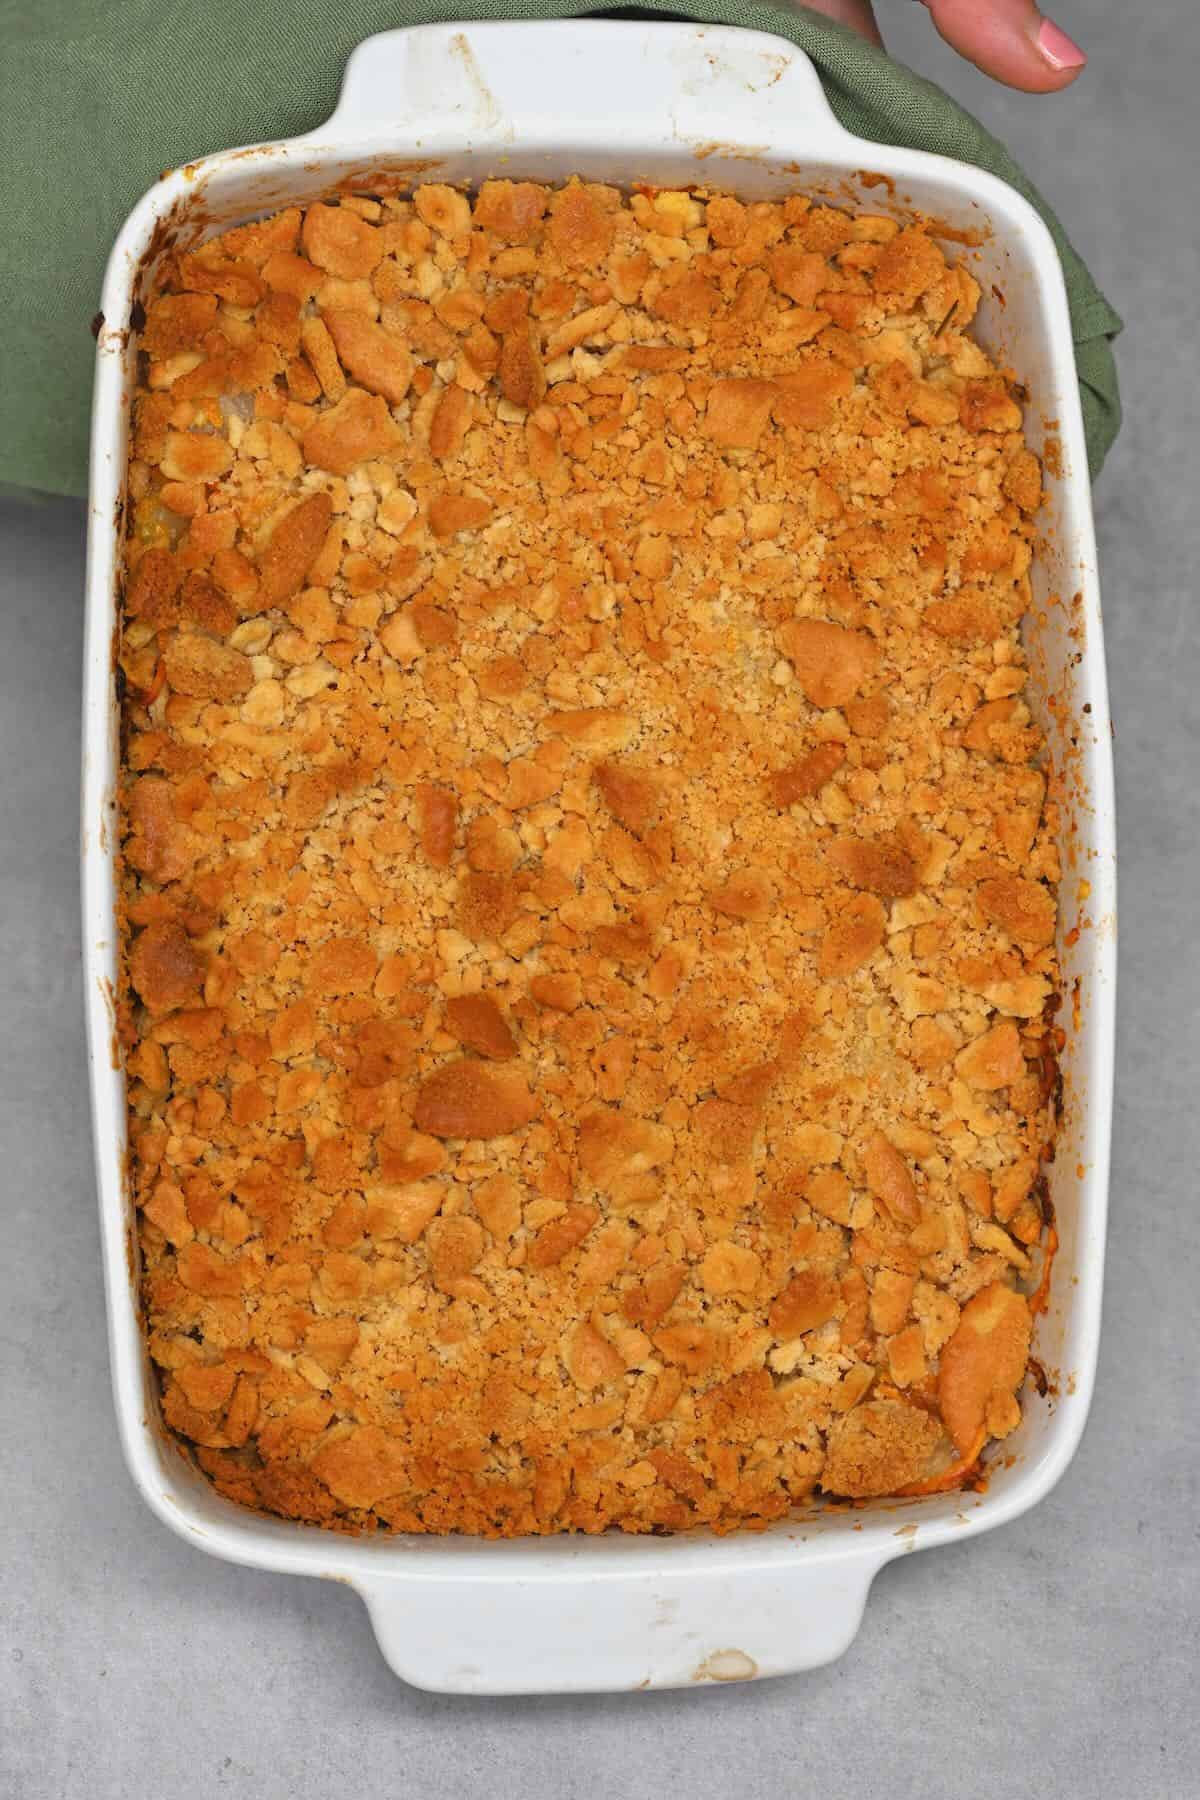 Freshly baked pineapple casserole in a baking dish